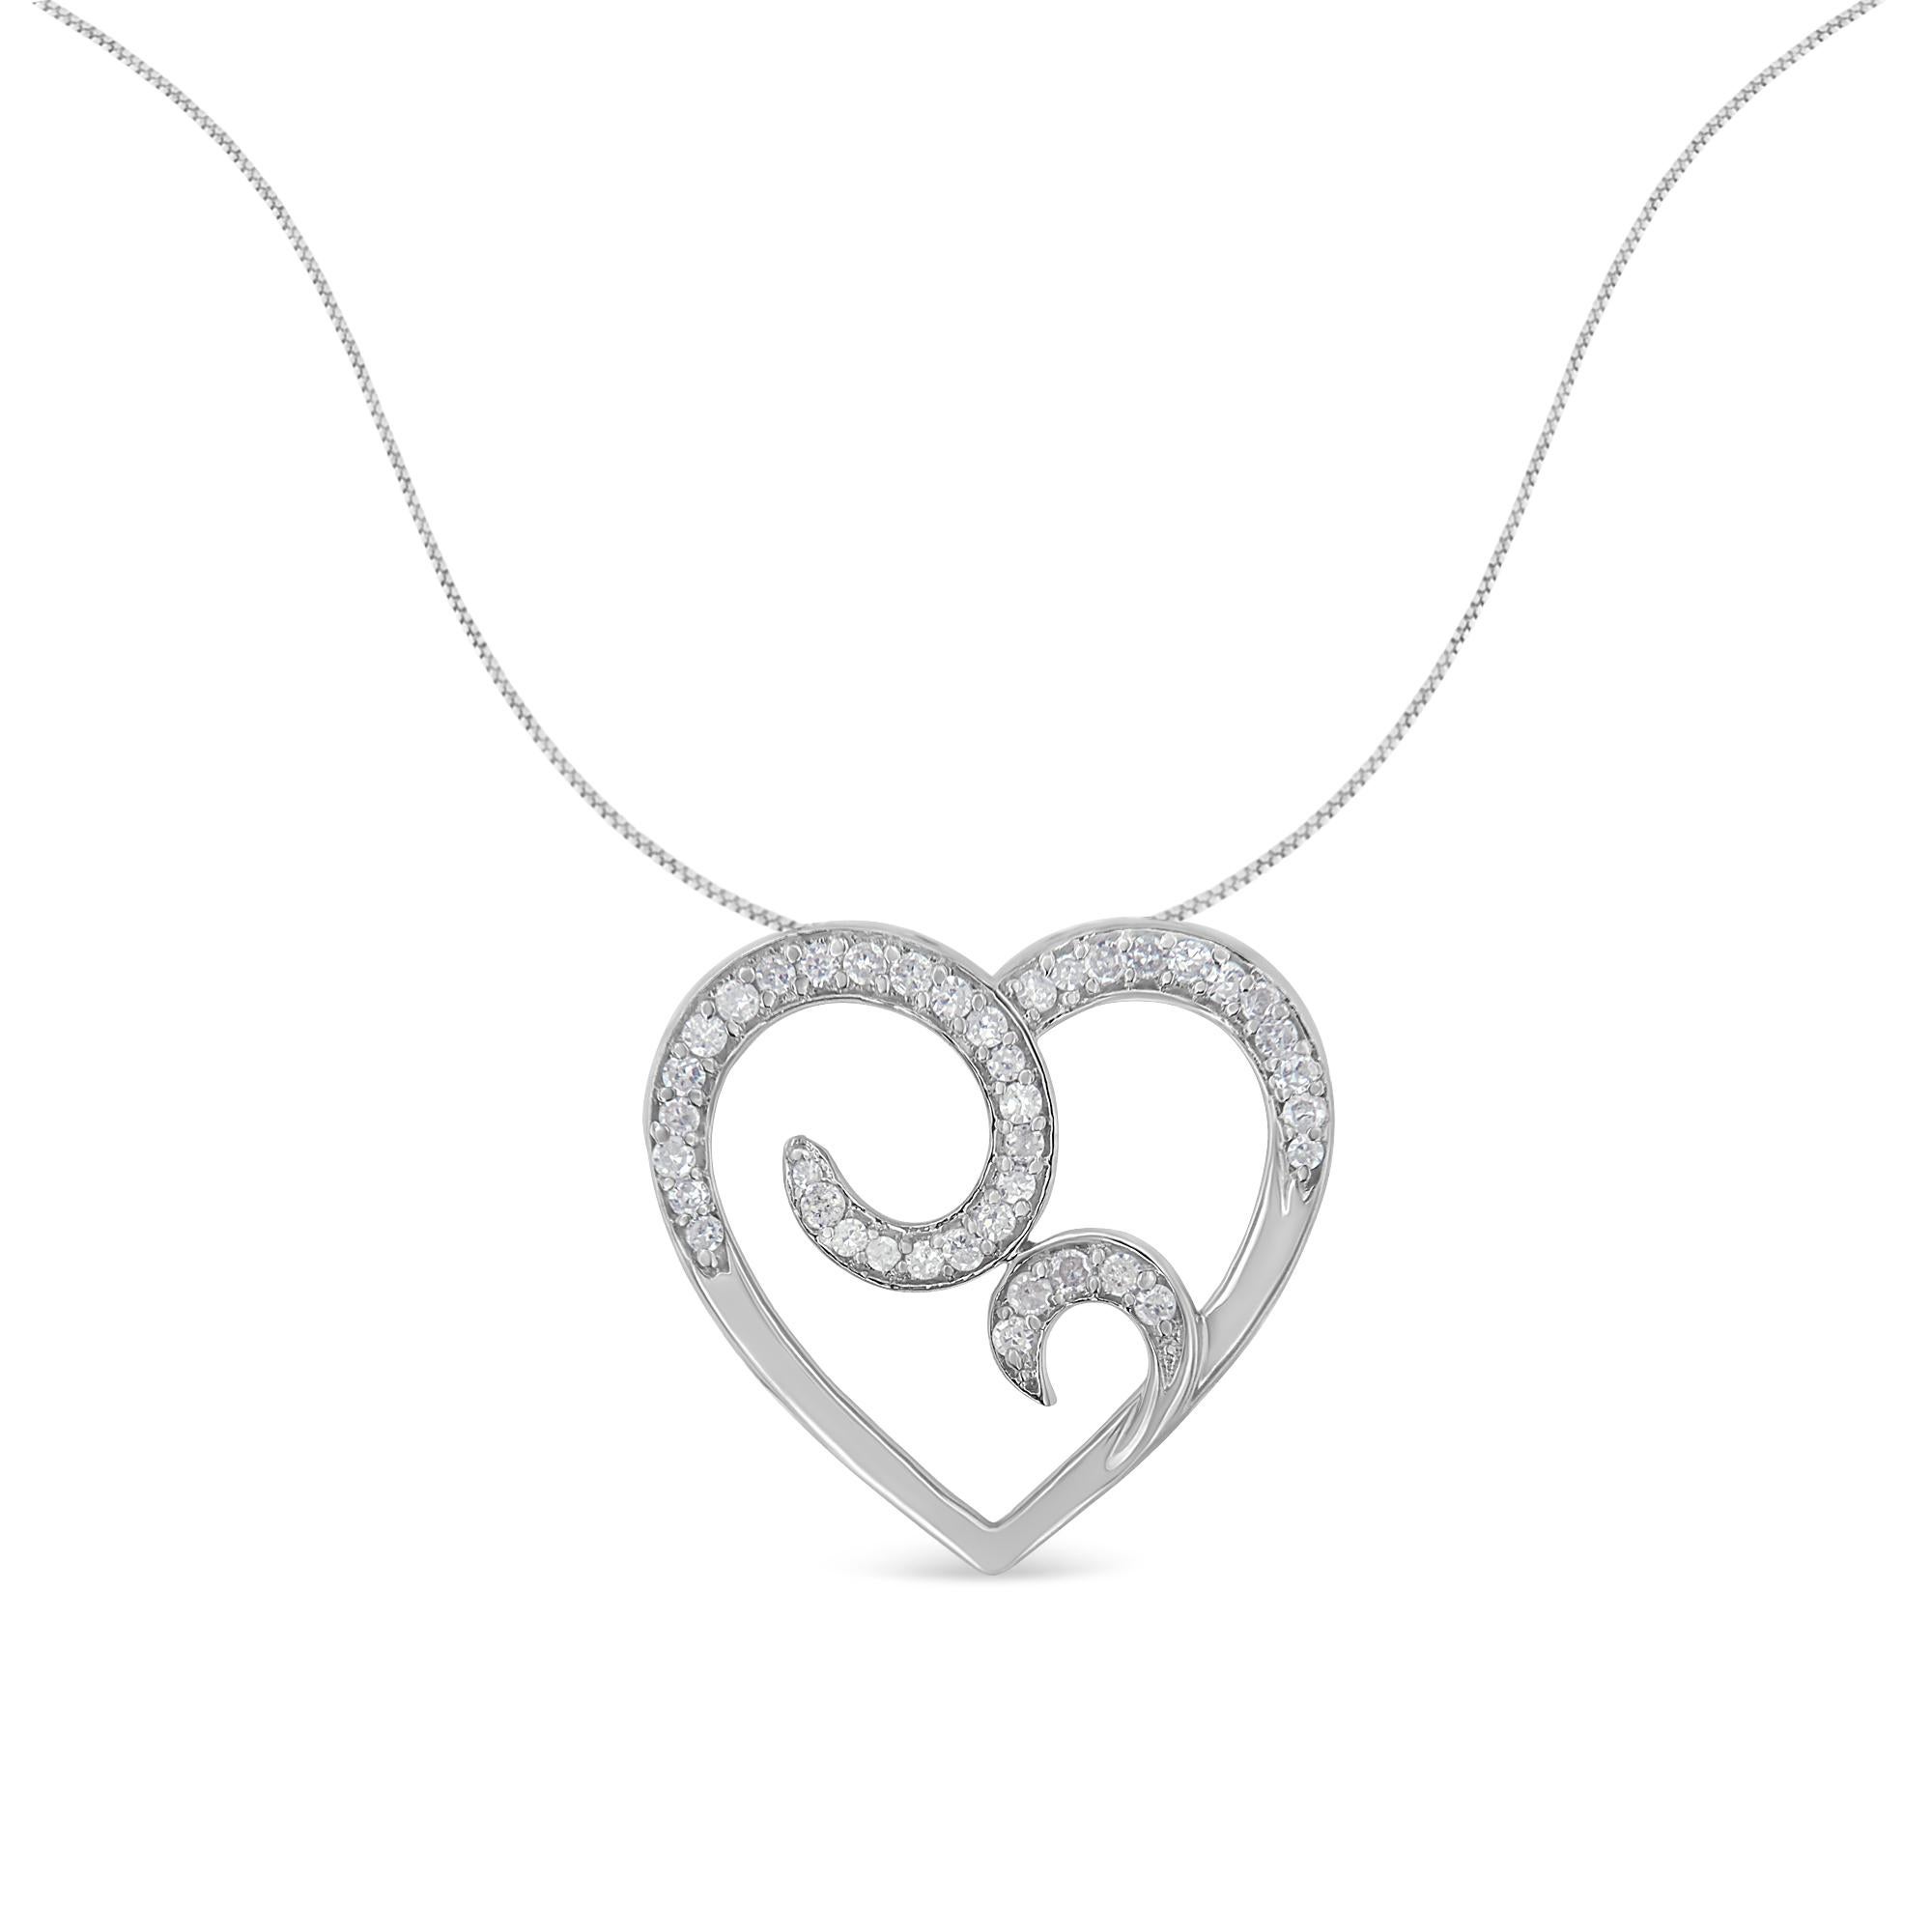 Set her heart ablaze with this shimmering diamond heart pendant necklace. More than 0.25 carat of diamonds are set in bright sterling silver crafted into a soft curving heart shape. Wrap it up with a bow and the pendant makes a perfect gift for